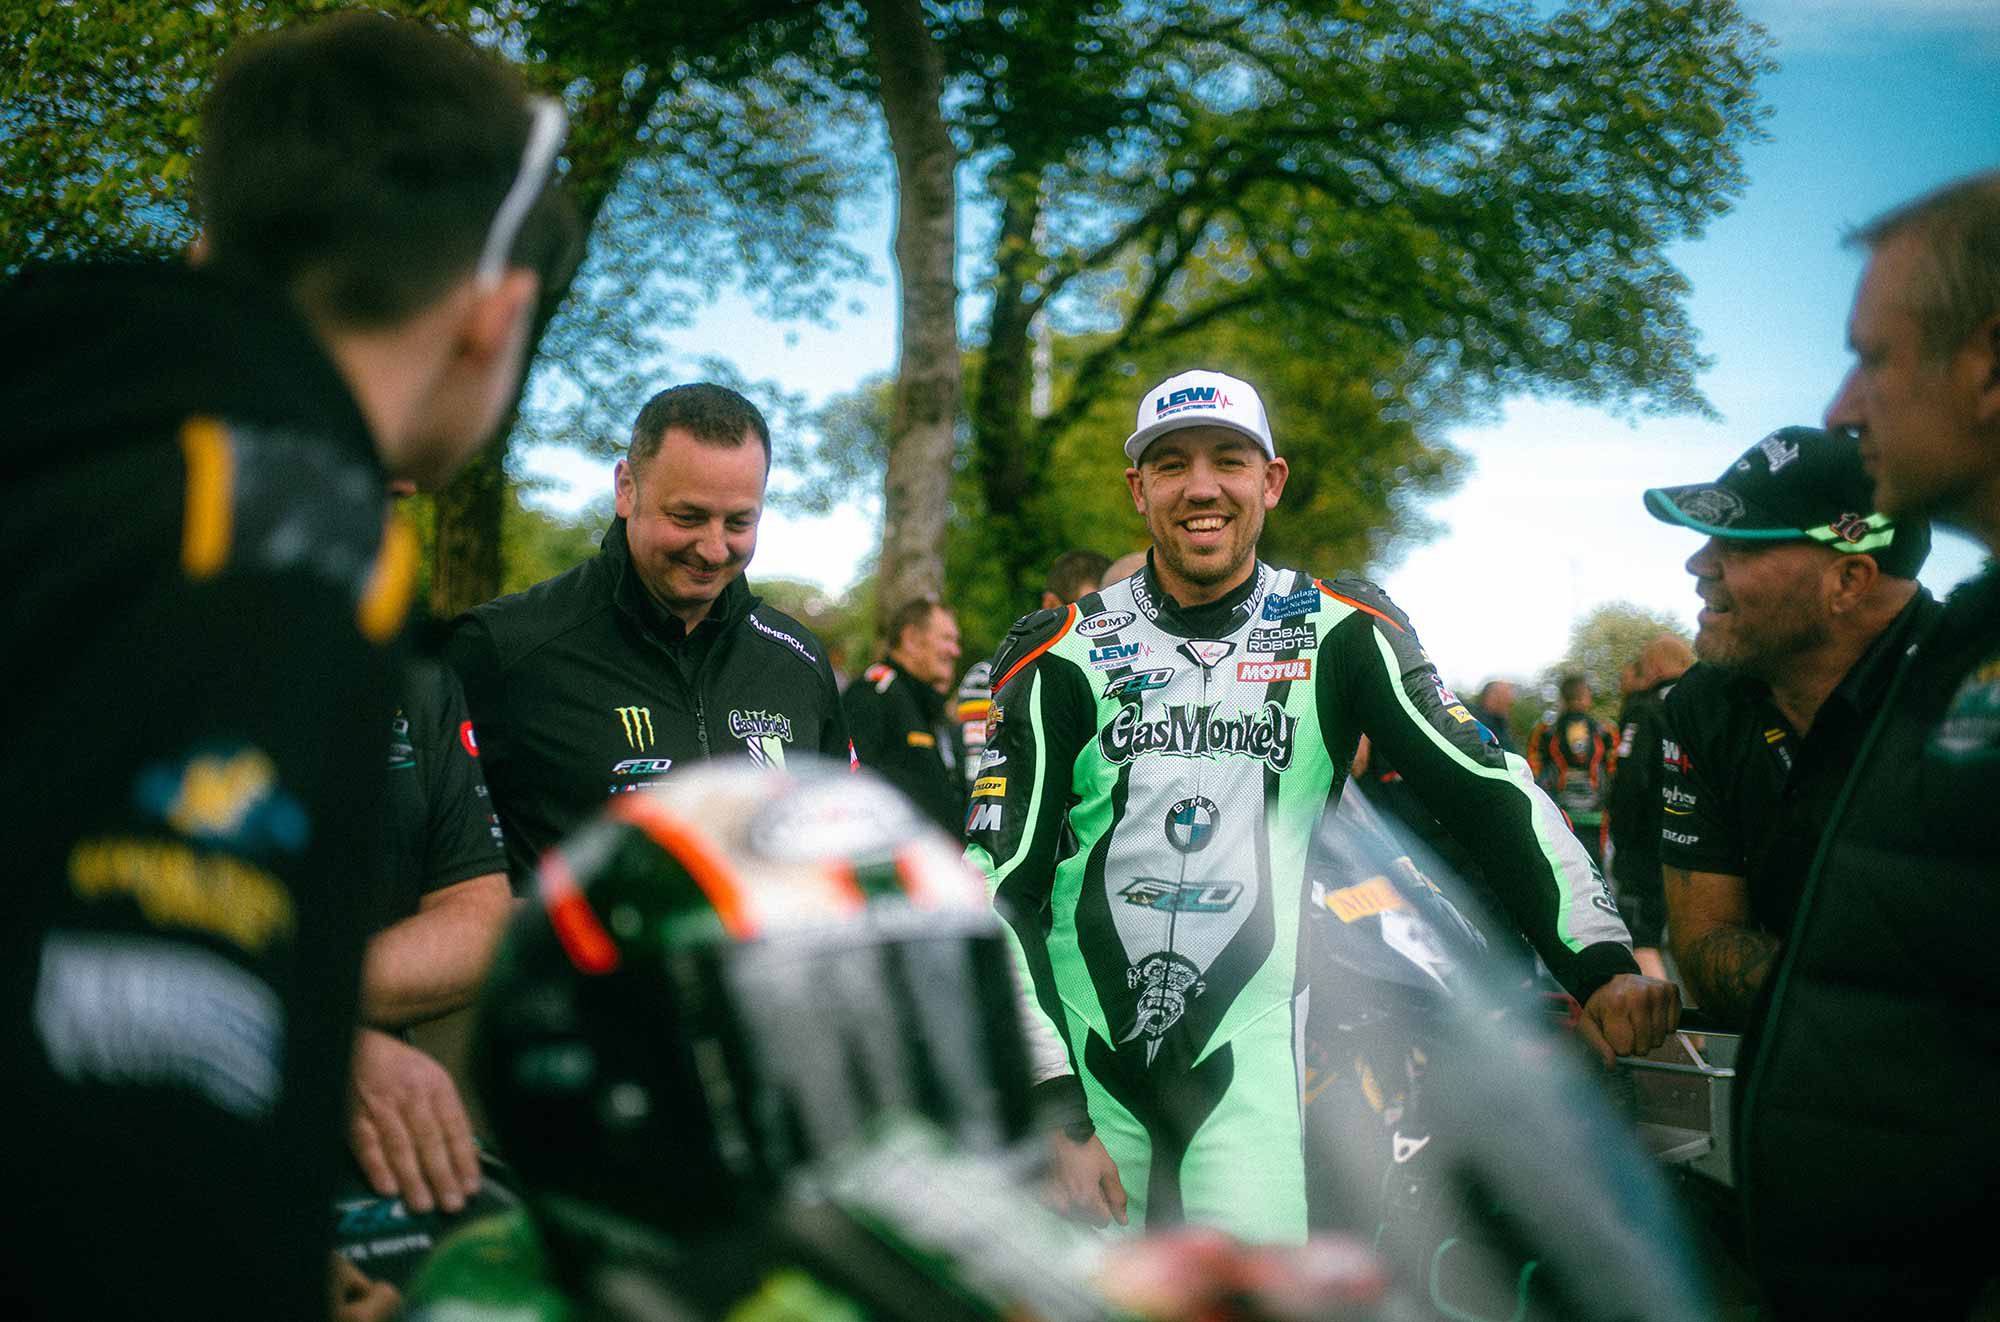 Peter Hickman, the Man of the Hour. Or 16:59.579 minutes, to be exact.